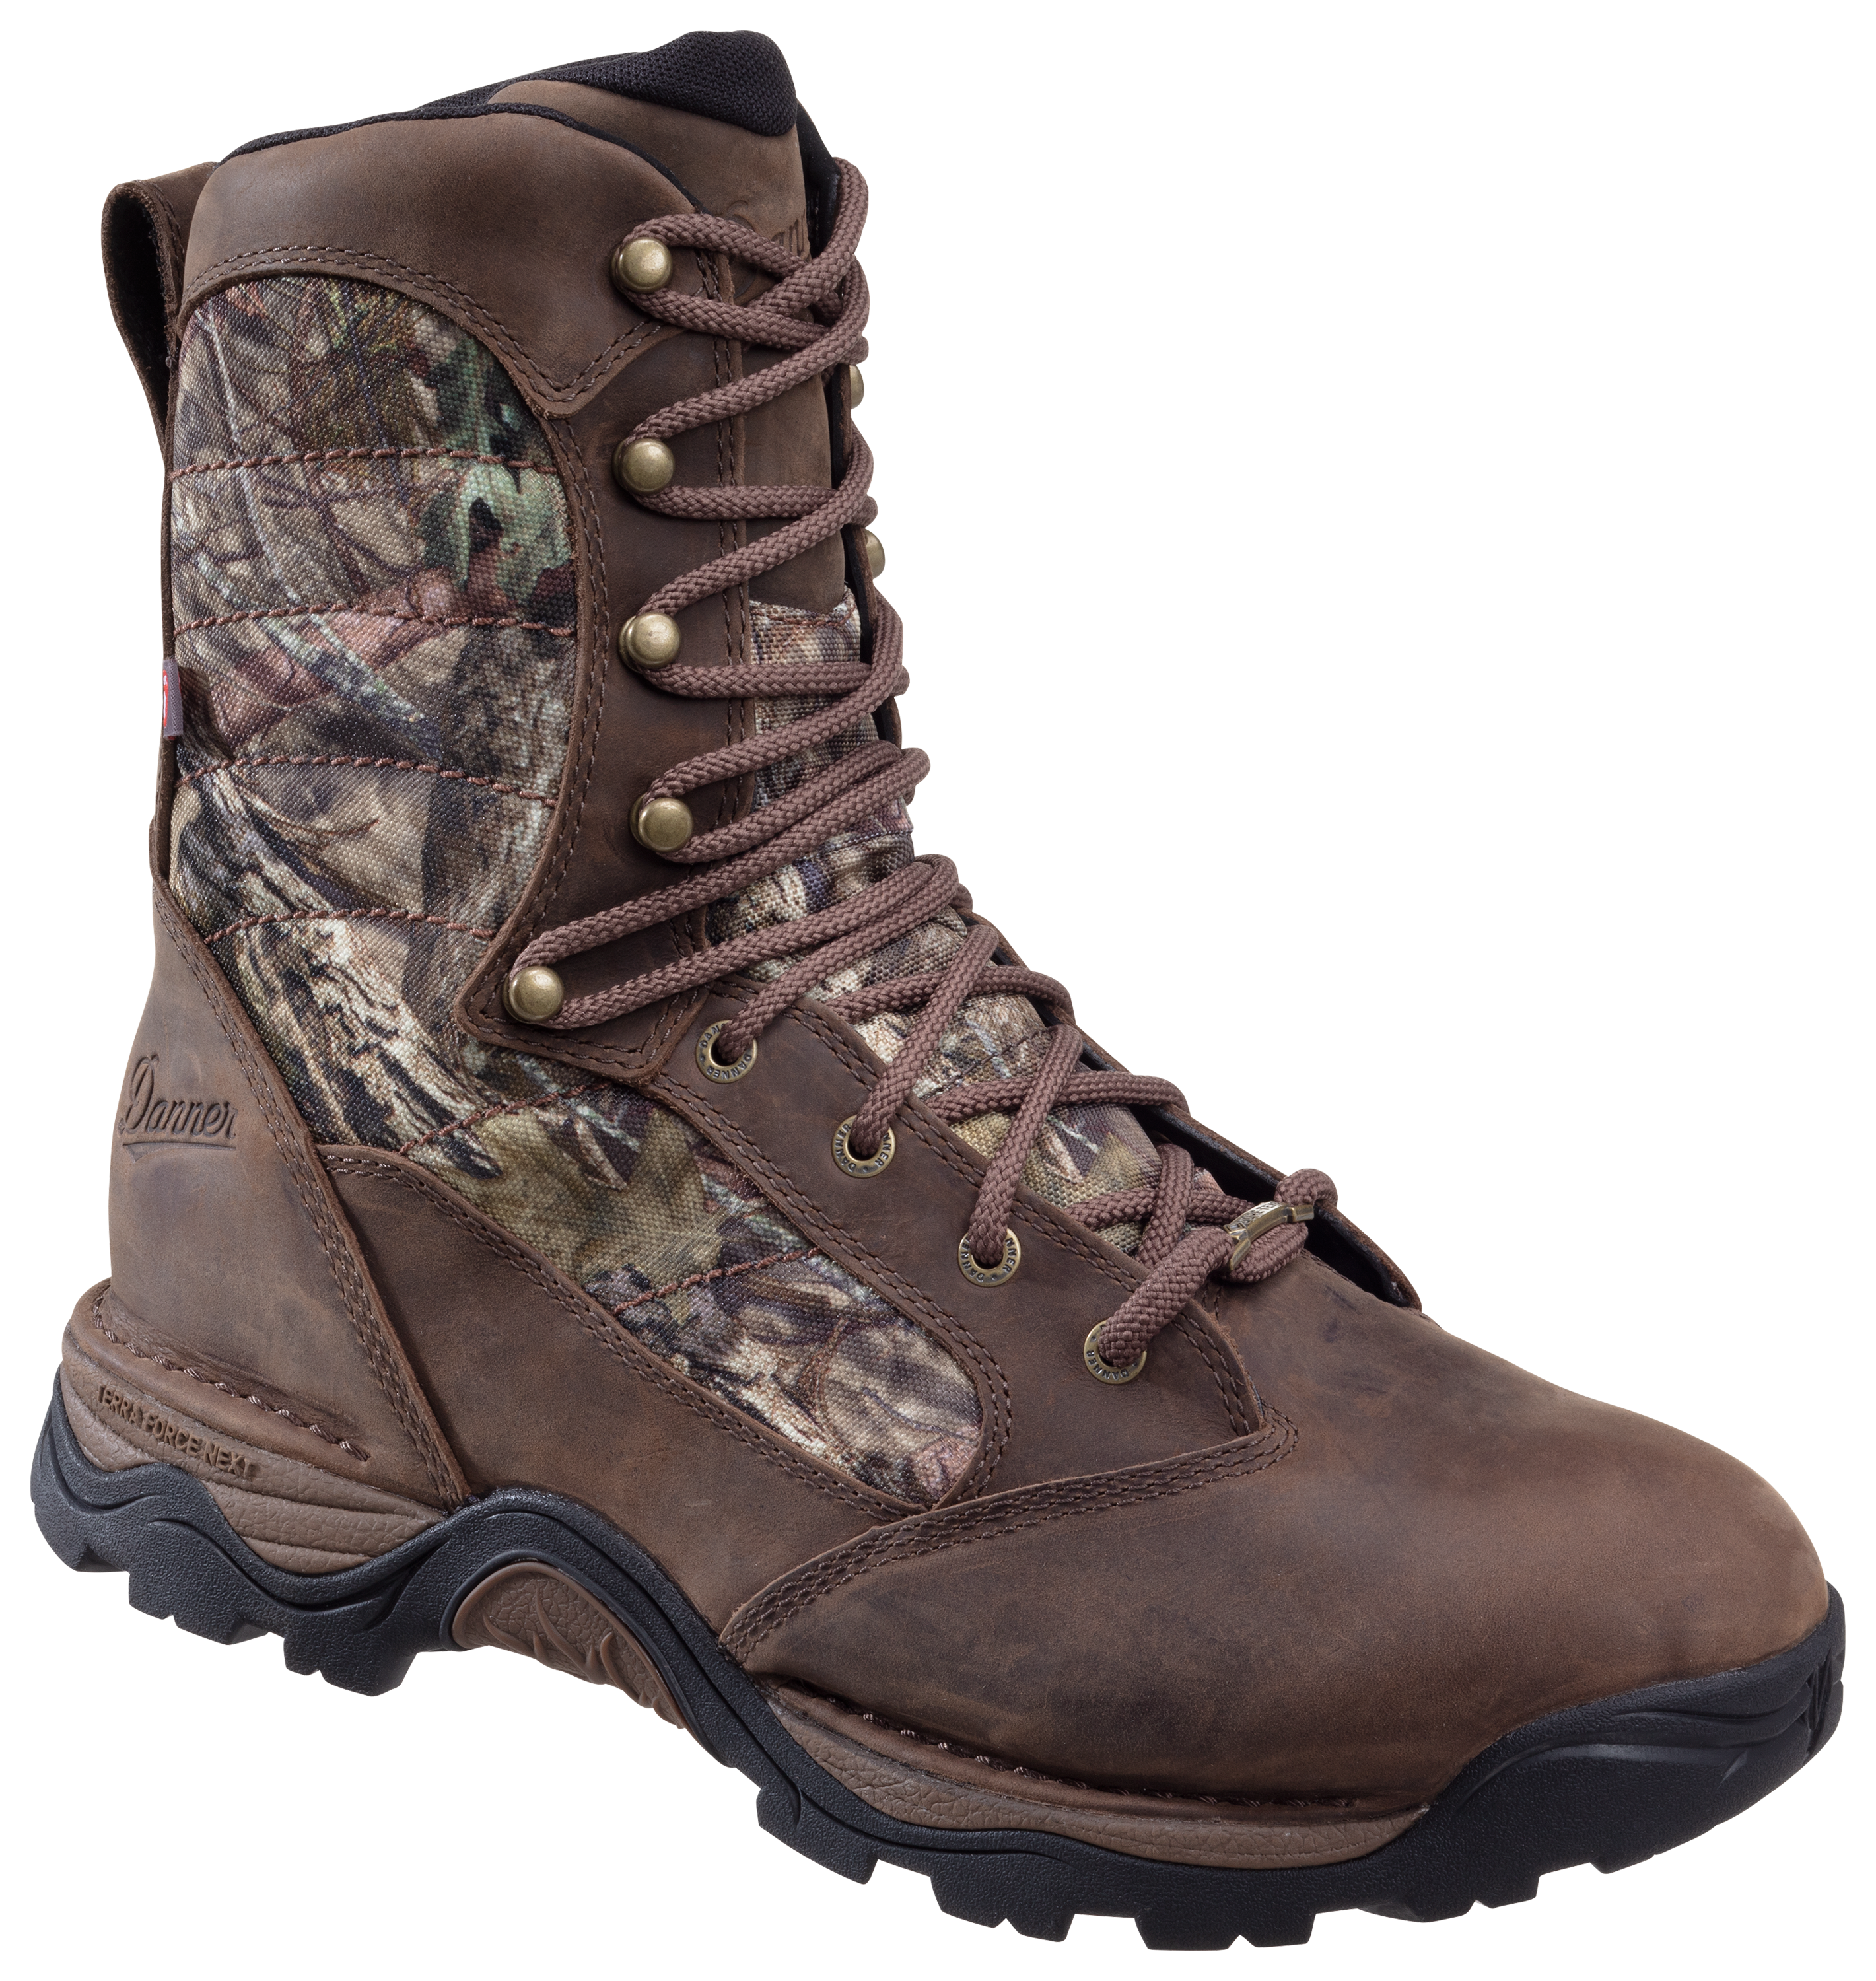 Danner Pronghorn 800 Insulated GORE-TEX Hunting Boots for Men